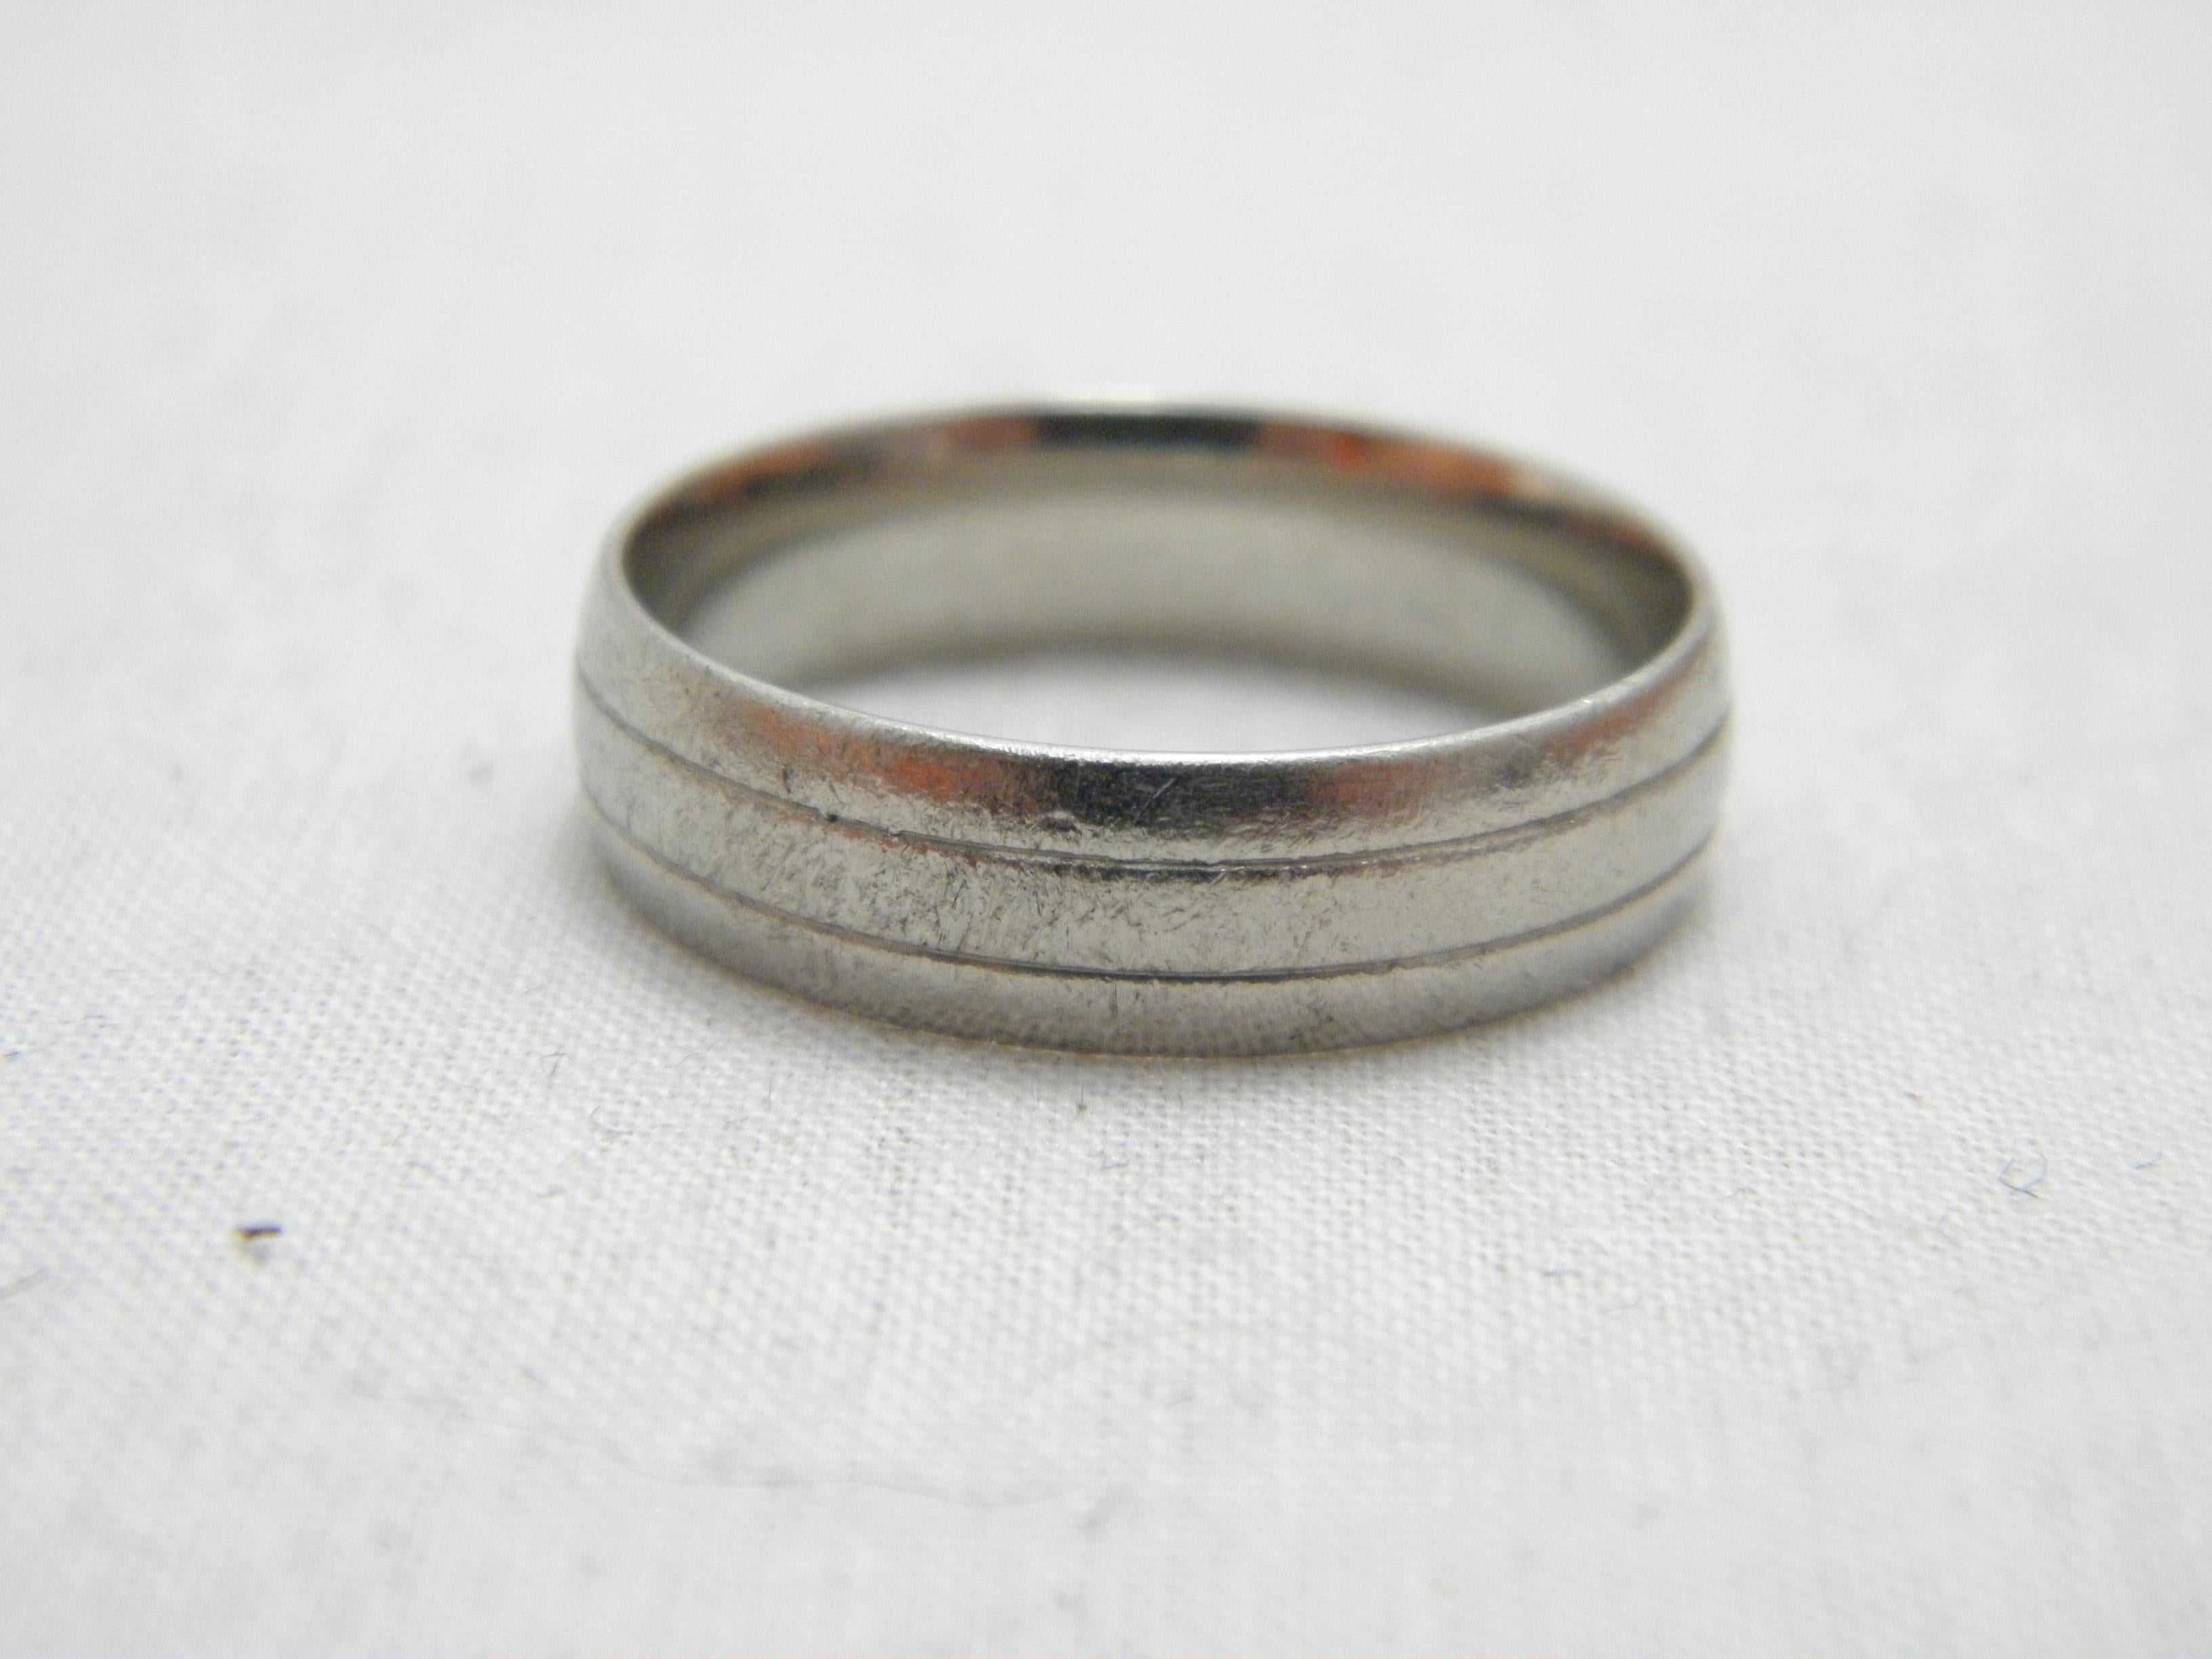 Vintage Palladium 6mm Wedding Ring Size W 11.25 950 Purity Band Bevelled Burnish In Good Condition For Sale In Camelford, GB